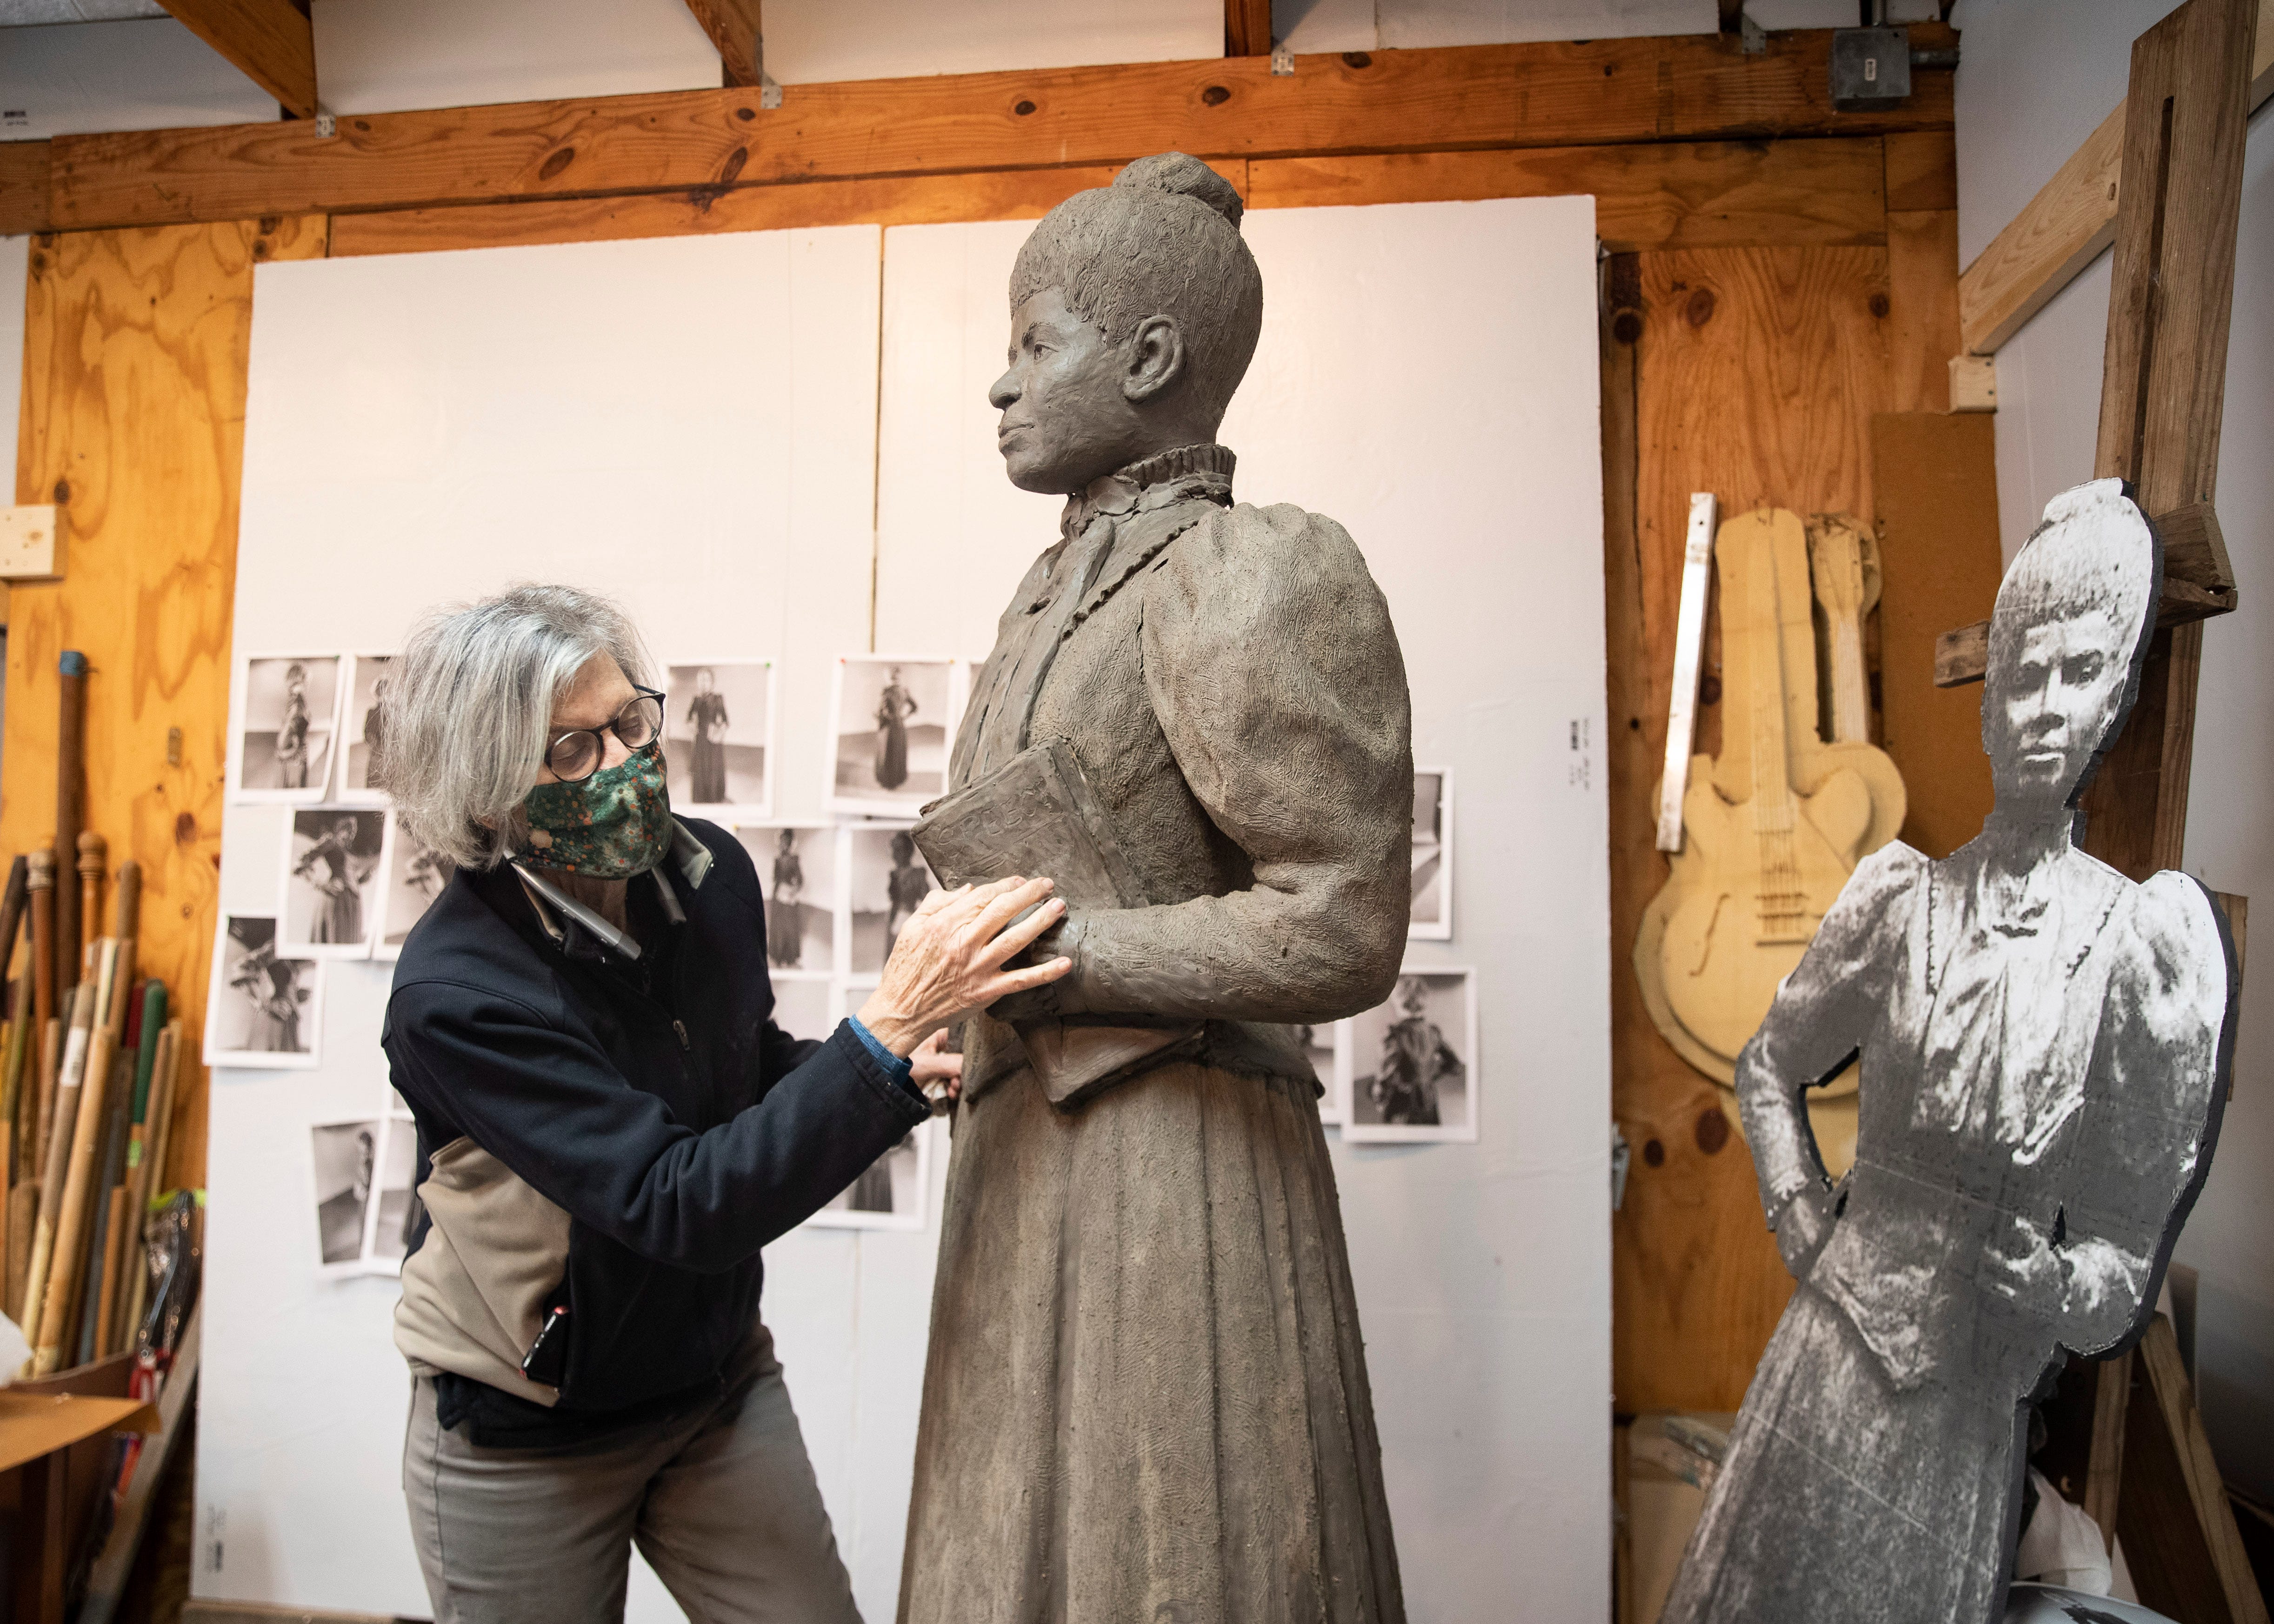 Andrea Lugar of the Lugar Bronze Foundry in Eads, Tenn.,  sculpts the statue of Ida B. Wells-Barnett, the African American civil rights advocate and journalist who fought against racism, segregation and lynching, at her home studio on Friday, March 15, 2021.